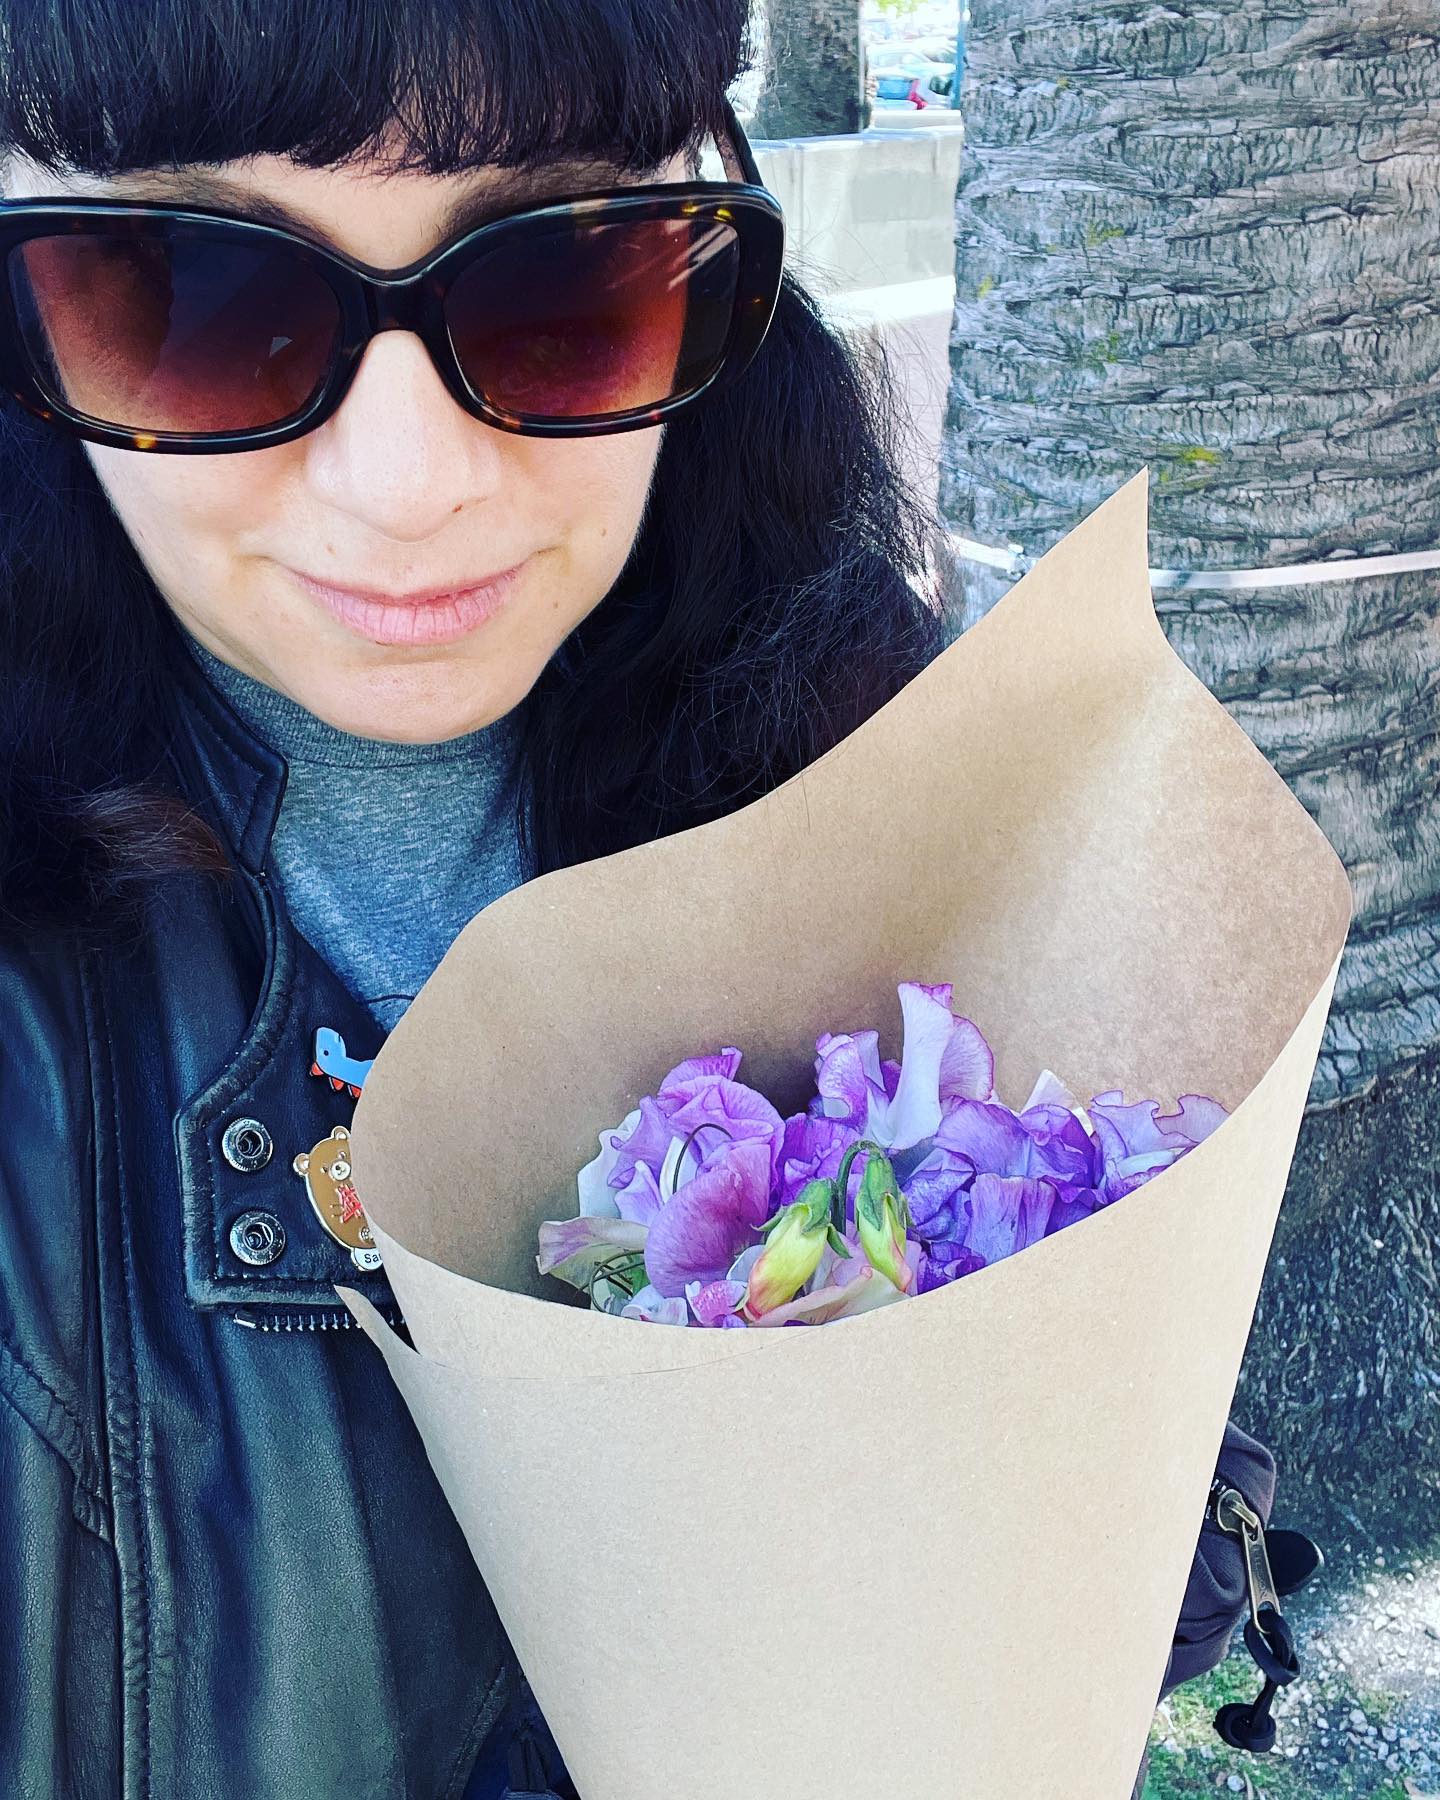 Farmers market trip today to the @ferrybuilding  Did the cliched thing and bought a bunch of flowers #sweetpeas for my apartment.